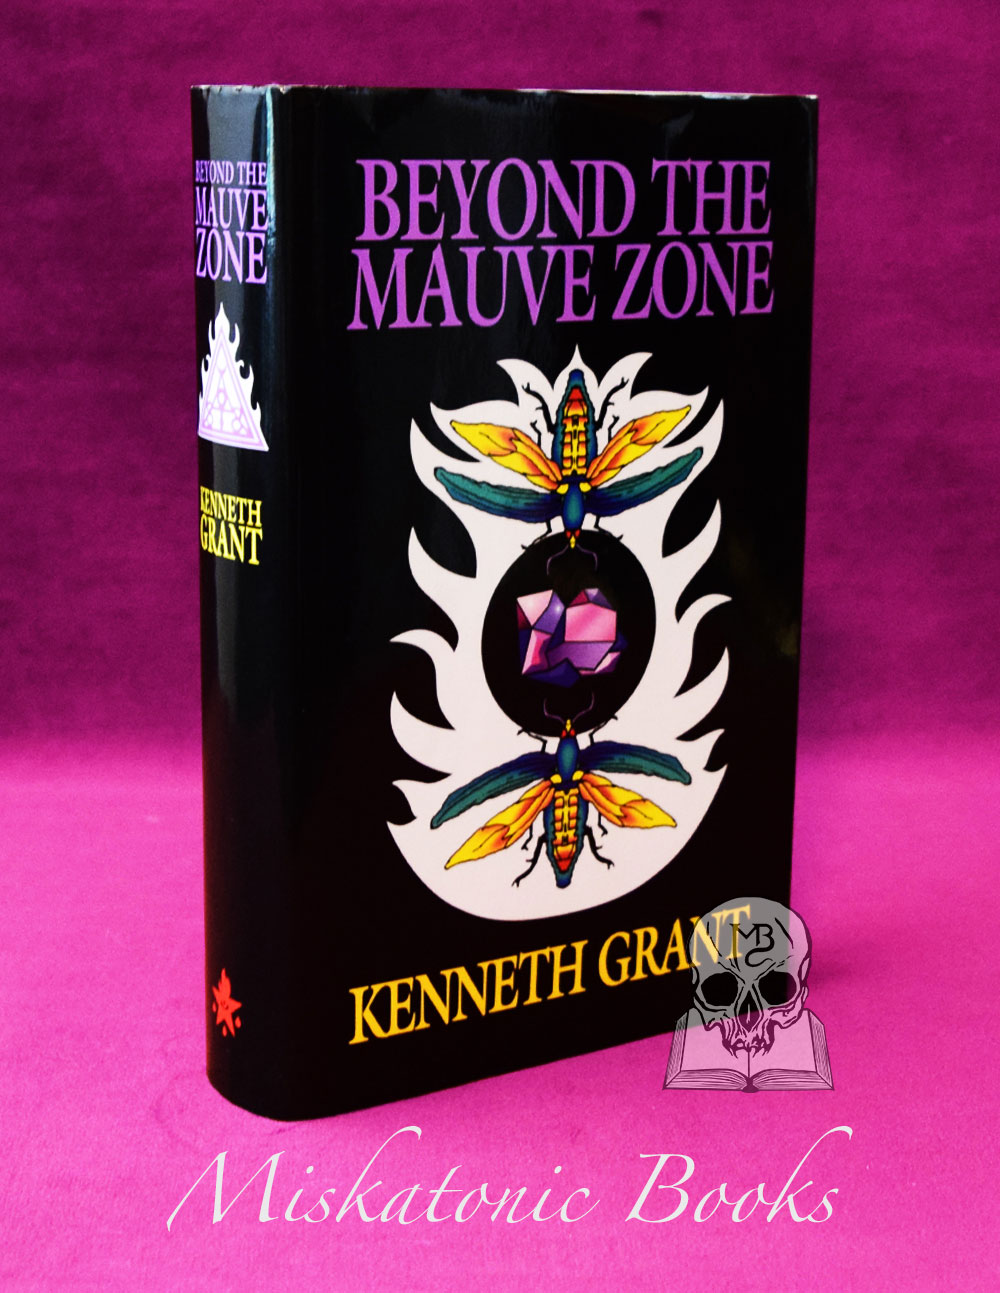 BEYOND THE MAUVE ZONE by Kenneth Grant - Signed DELUXE Quarter Bound in Leather and Marbled Boards 1st Edition Hardcover 1999 Edition